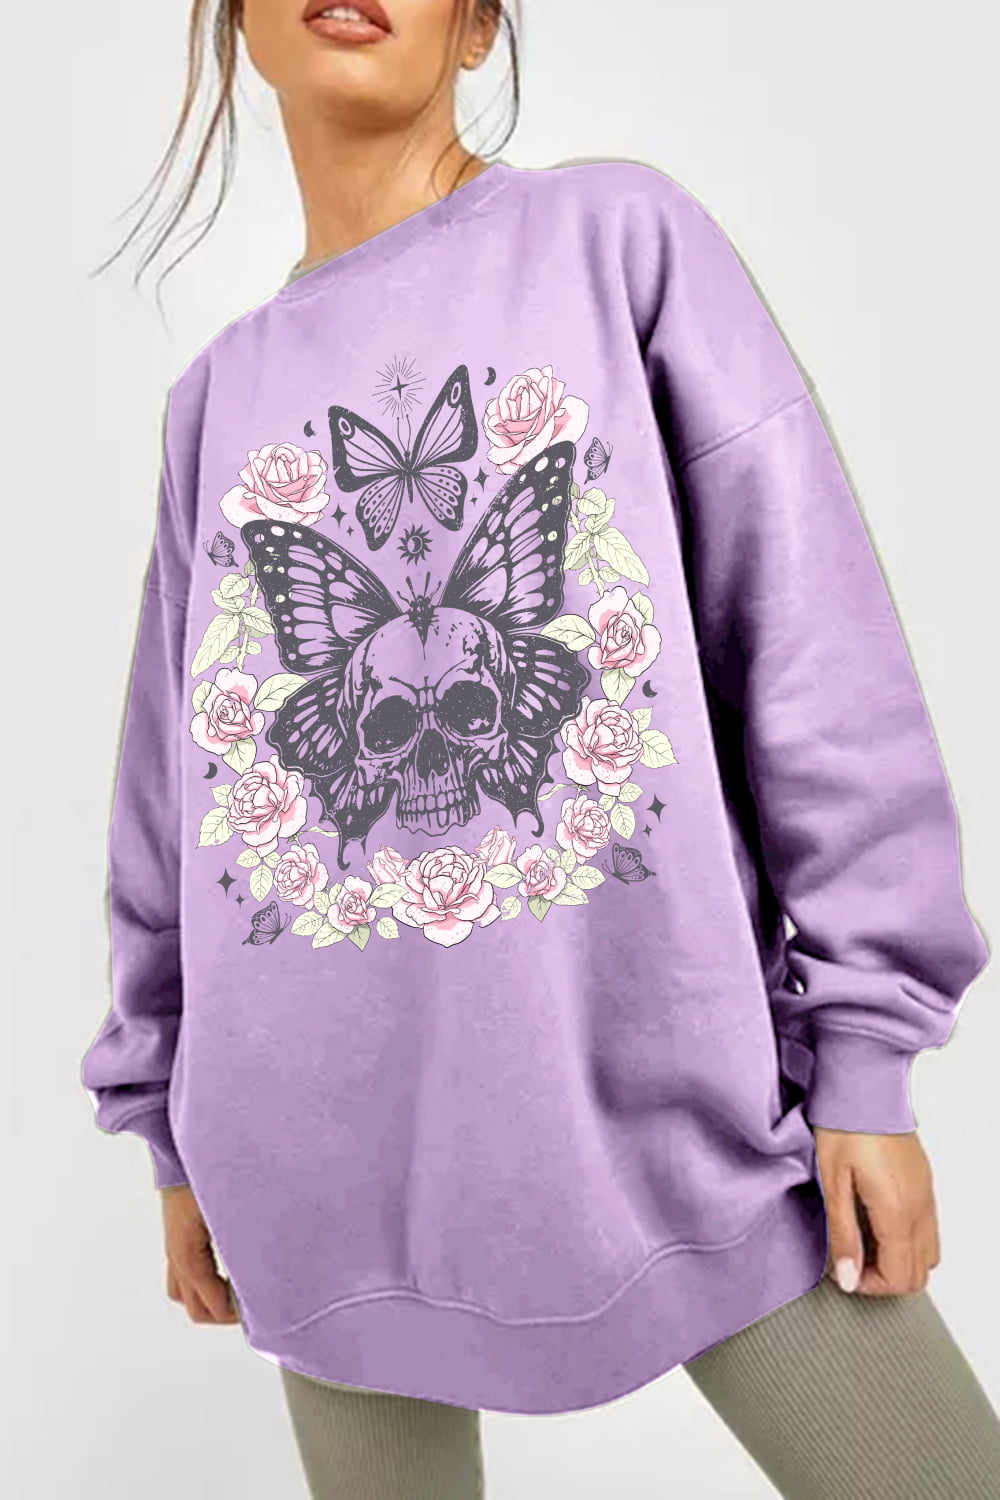 Simply Love Full Size Skull Butterfly Graphic Sweatshirt